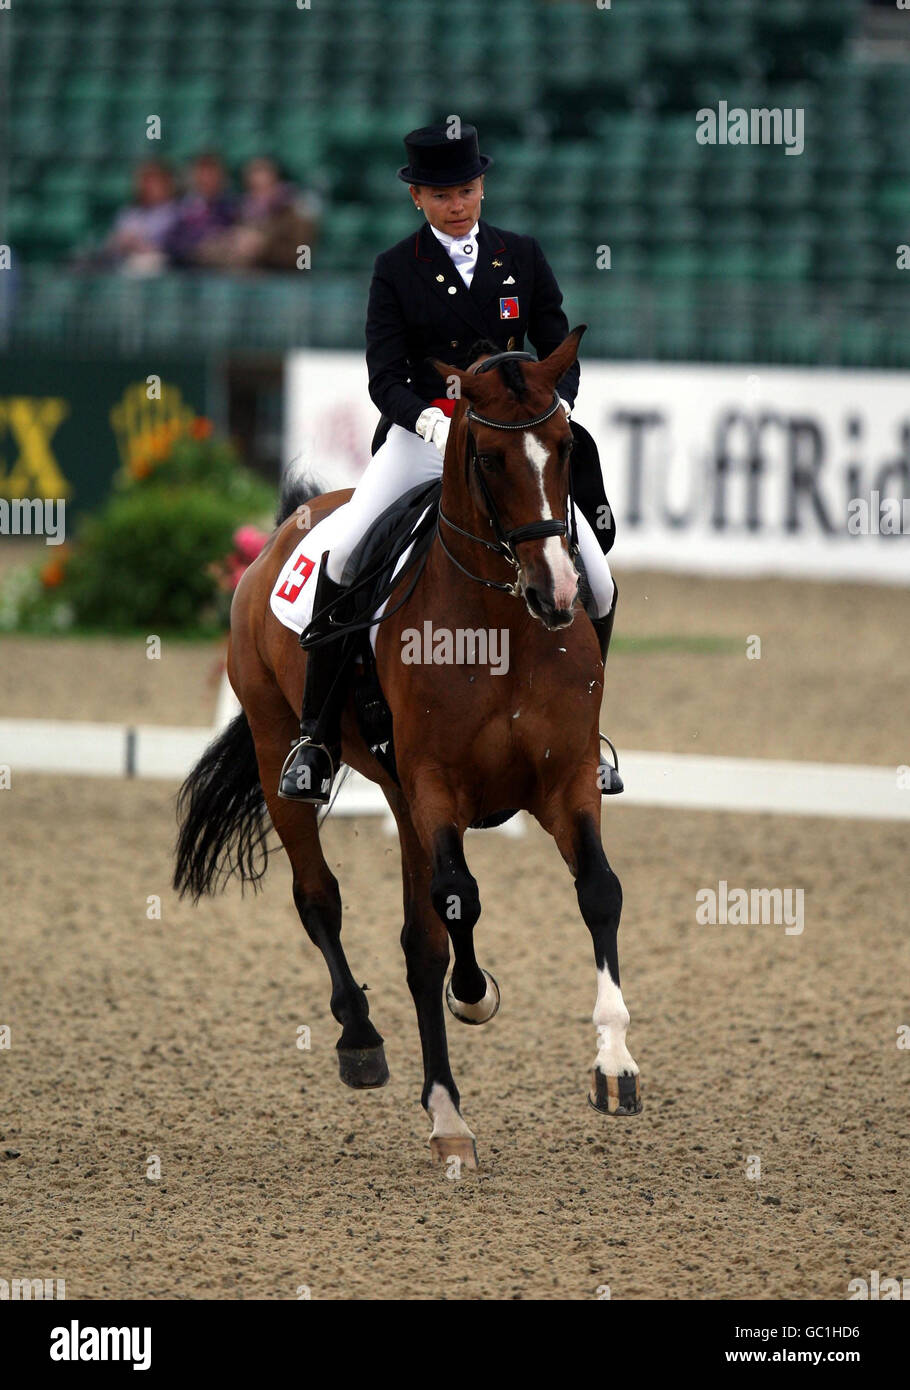 Switzerland's Marcela Krinke Susmelj riding Corinth competes during day two of The European Show Jumping and Dressage Championships, Windsor. Stock Photo